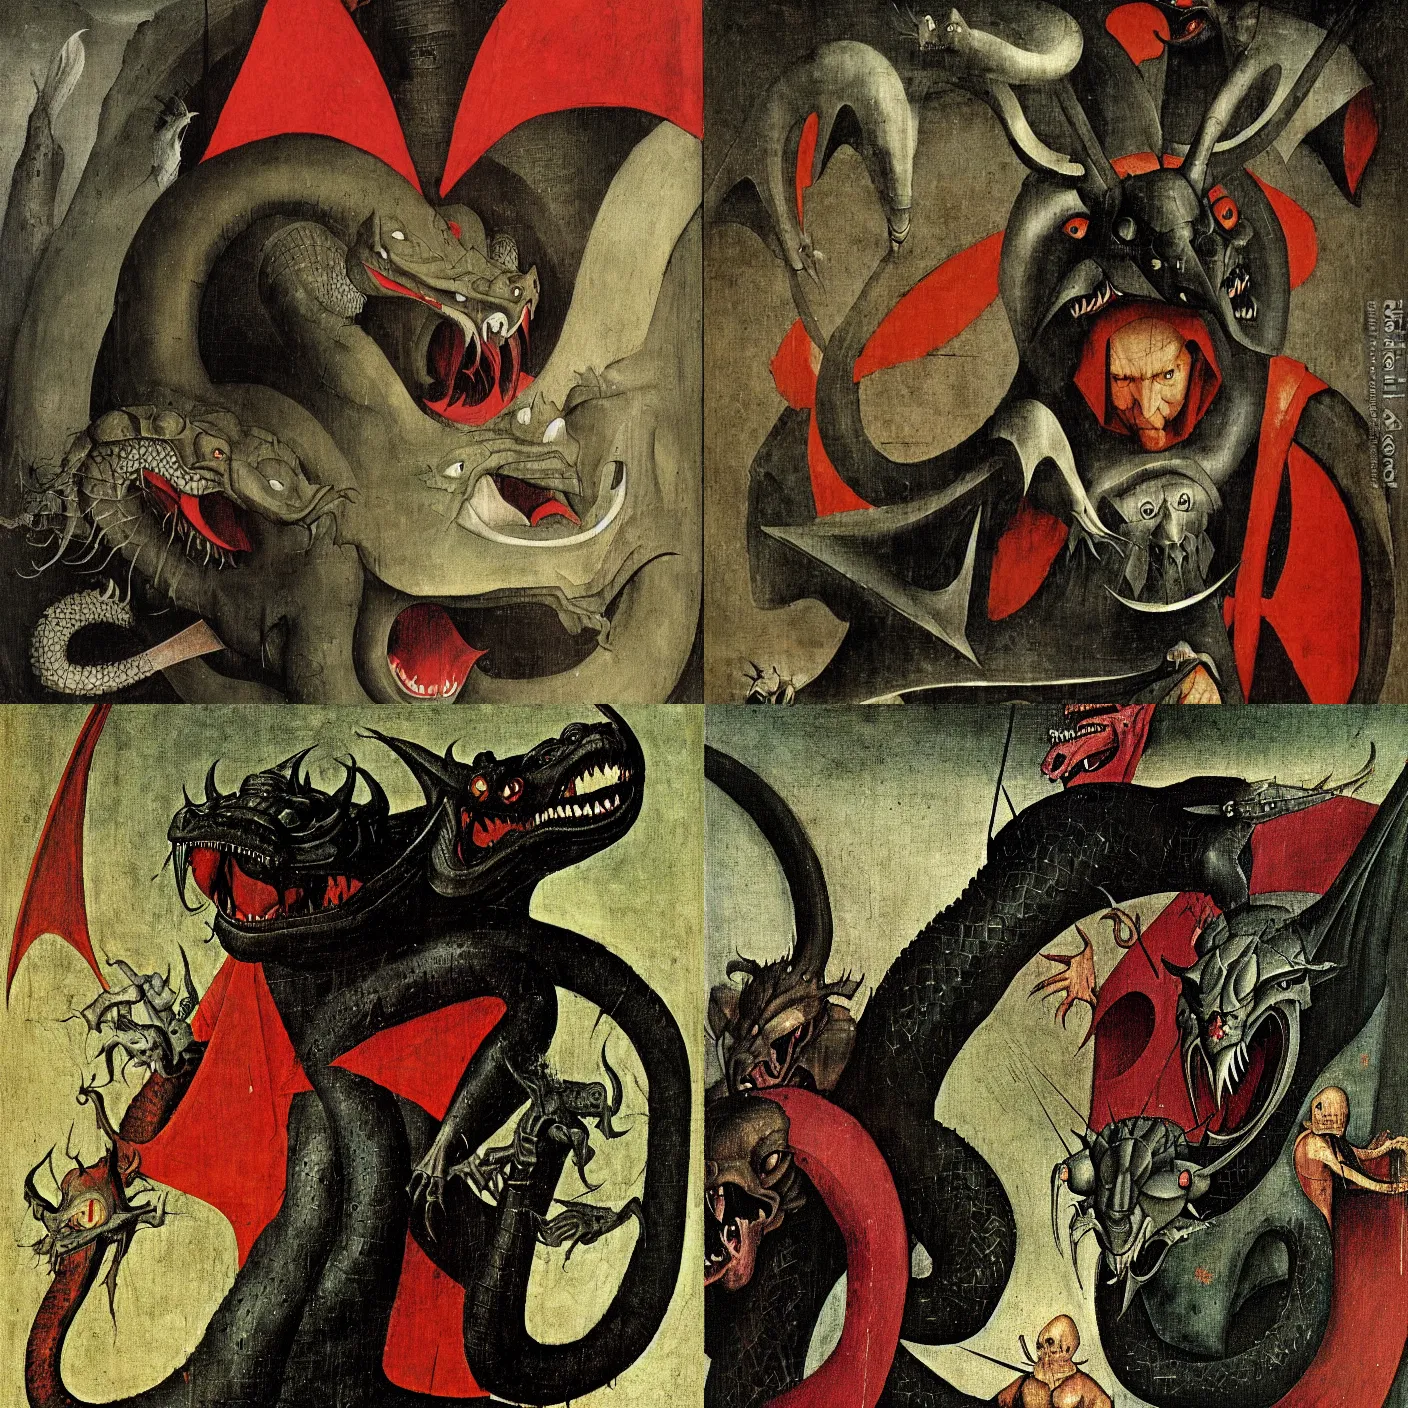 Prompt: A portrait of Venger, the force of evil battling Tiamat, the 5 headed dragon by Hieronymus Bosch